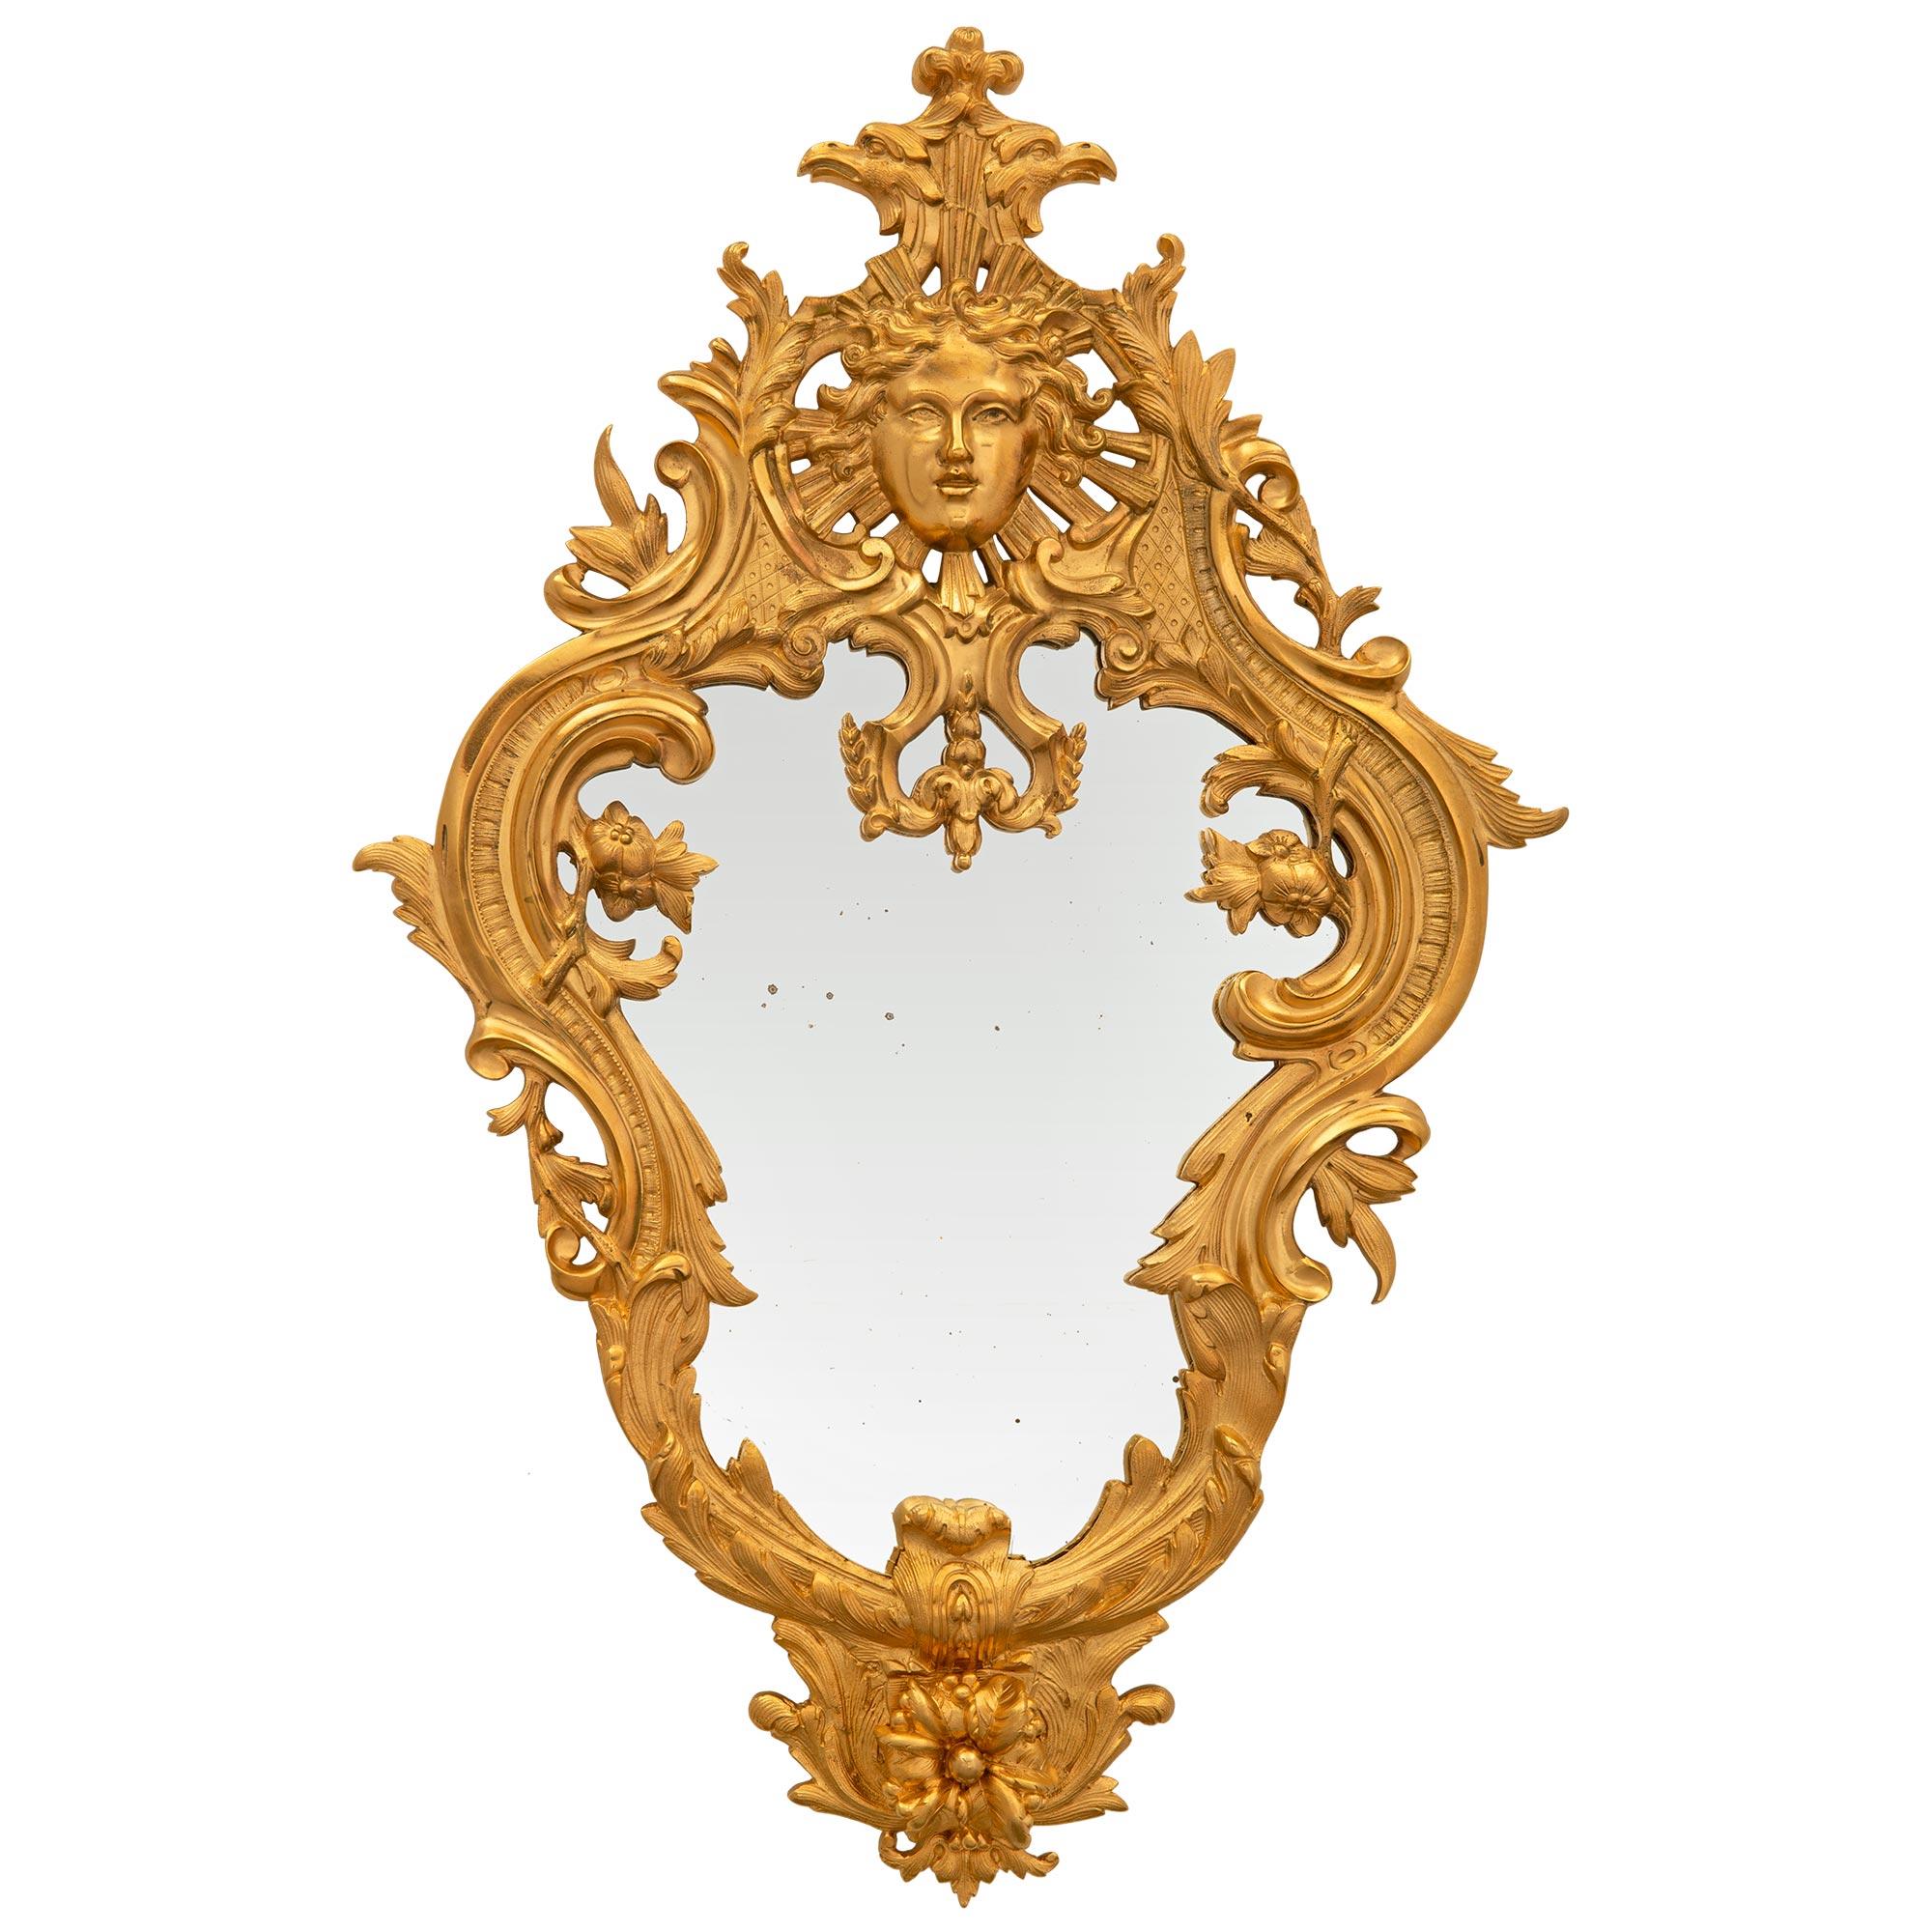 A beautiful French 19th century Régence st. giltwood mirror. The mirror retains its original mirror plate set within a charming and most elegant scalloped giltwood frame. The frame displays a richly carved floral reserve amidst acanthus leaves at